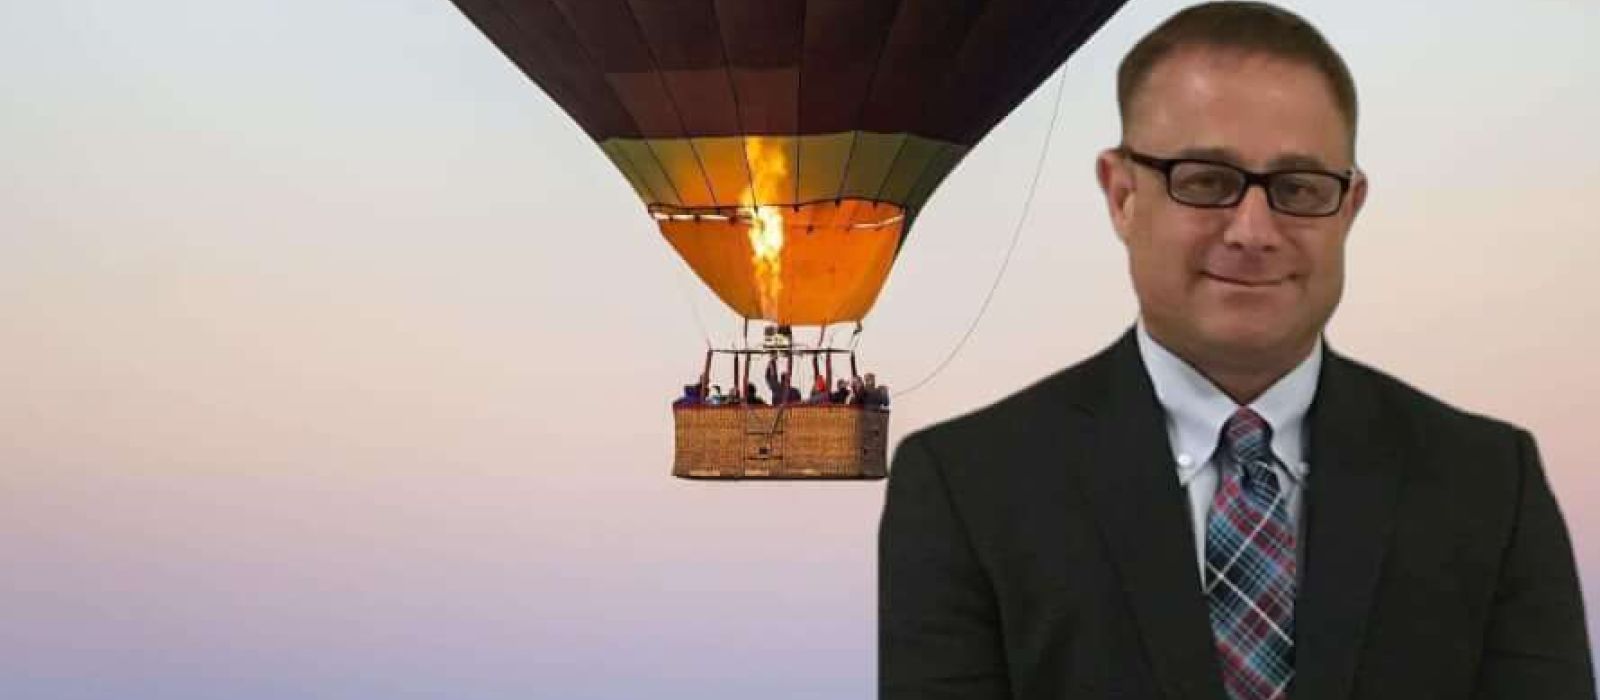 Hot Air Balloon Accident Attorneys